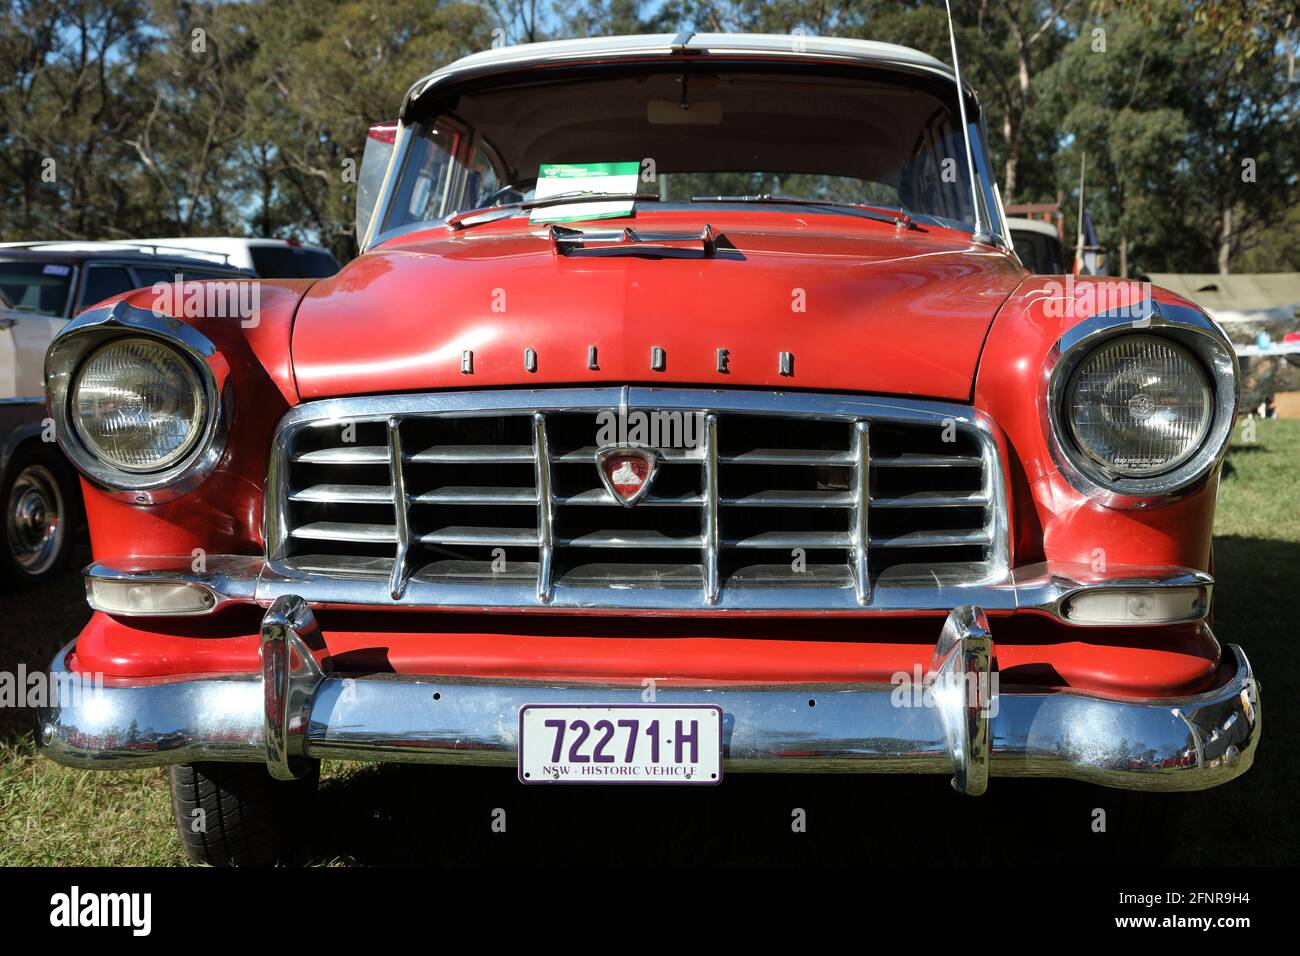 East Kurrajong, NSW, Australia - 16 May 2021. The front view of a vintage Holden FC automobile, made in Australia between 1958 and 1960. Stock Photo